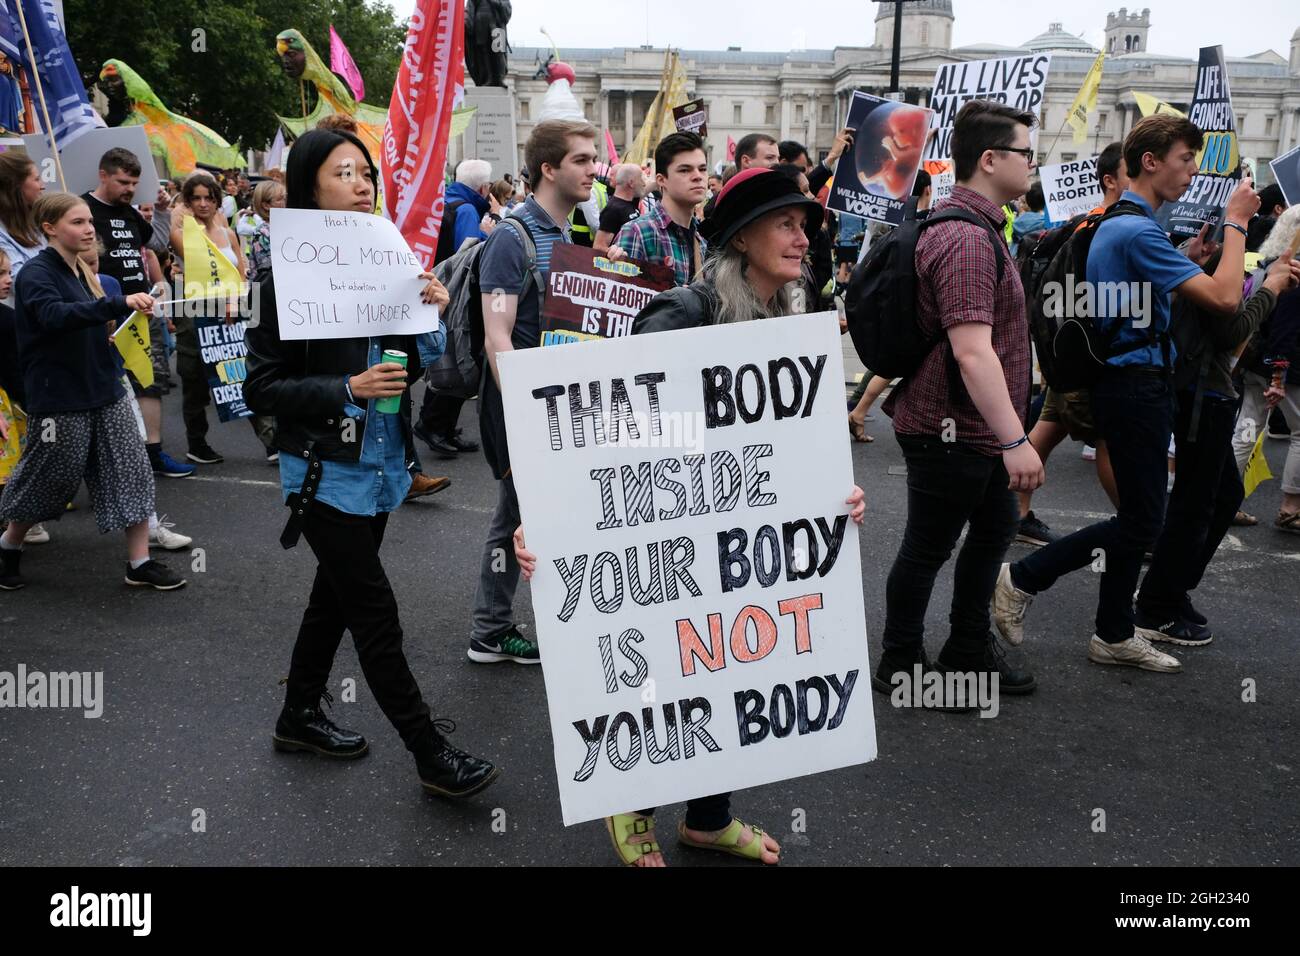 Trafalgar Square, London, UK. 4th Sept 2021. Pro life protesters in London at the March for Life, marching against abortion. Credit: Matthew Chattle/Alamy Live News Stock Photo